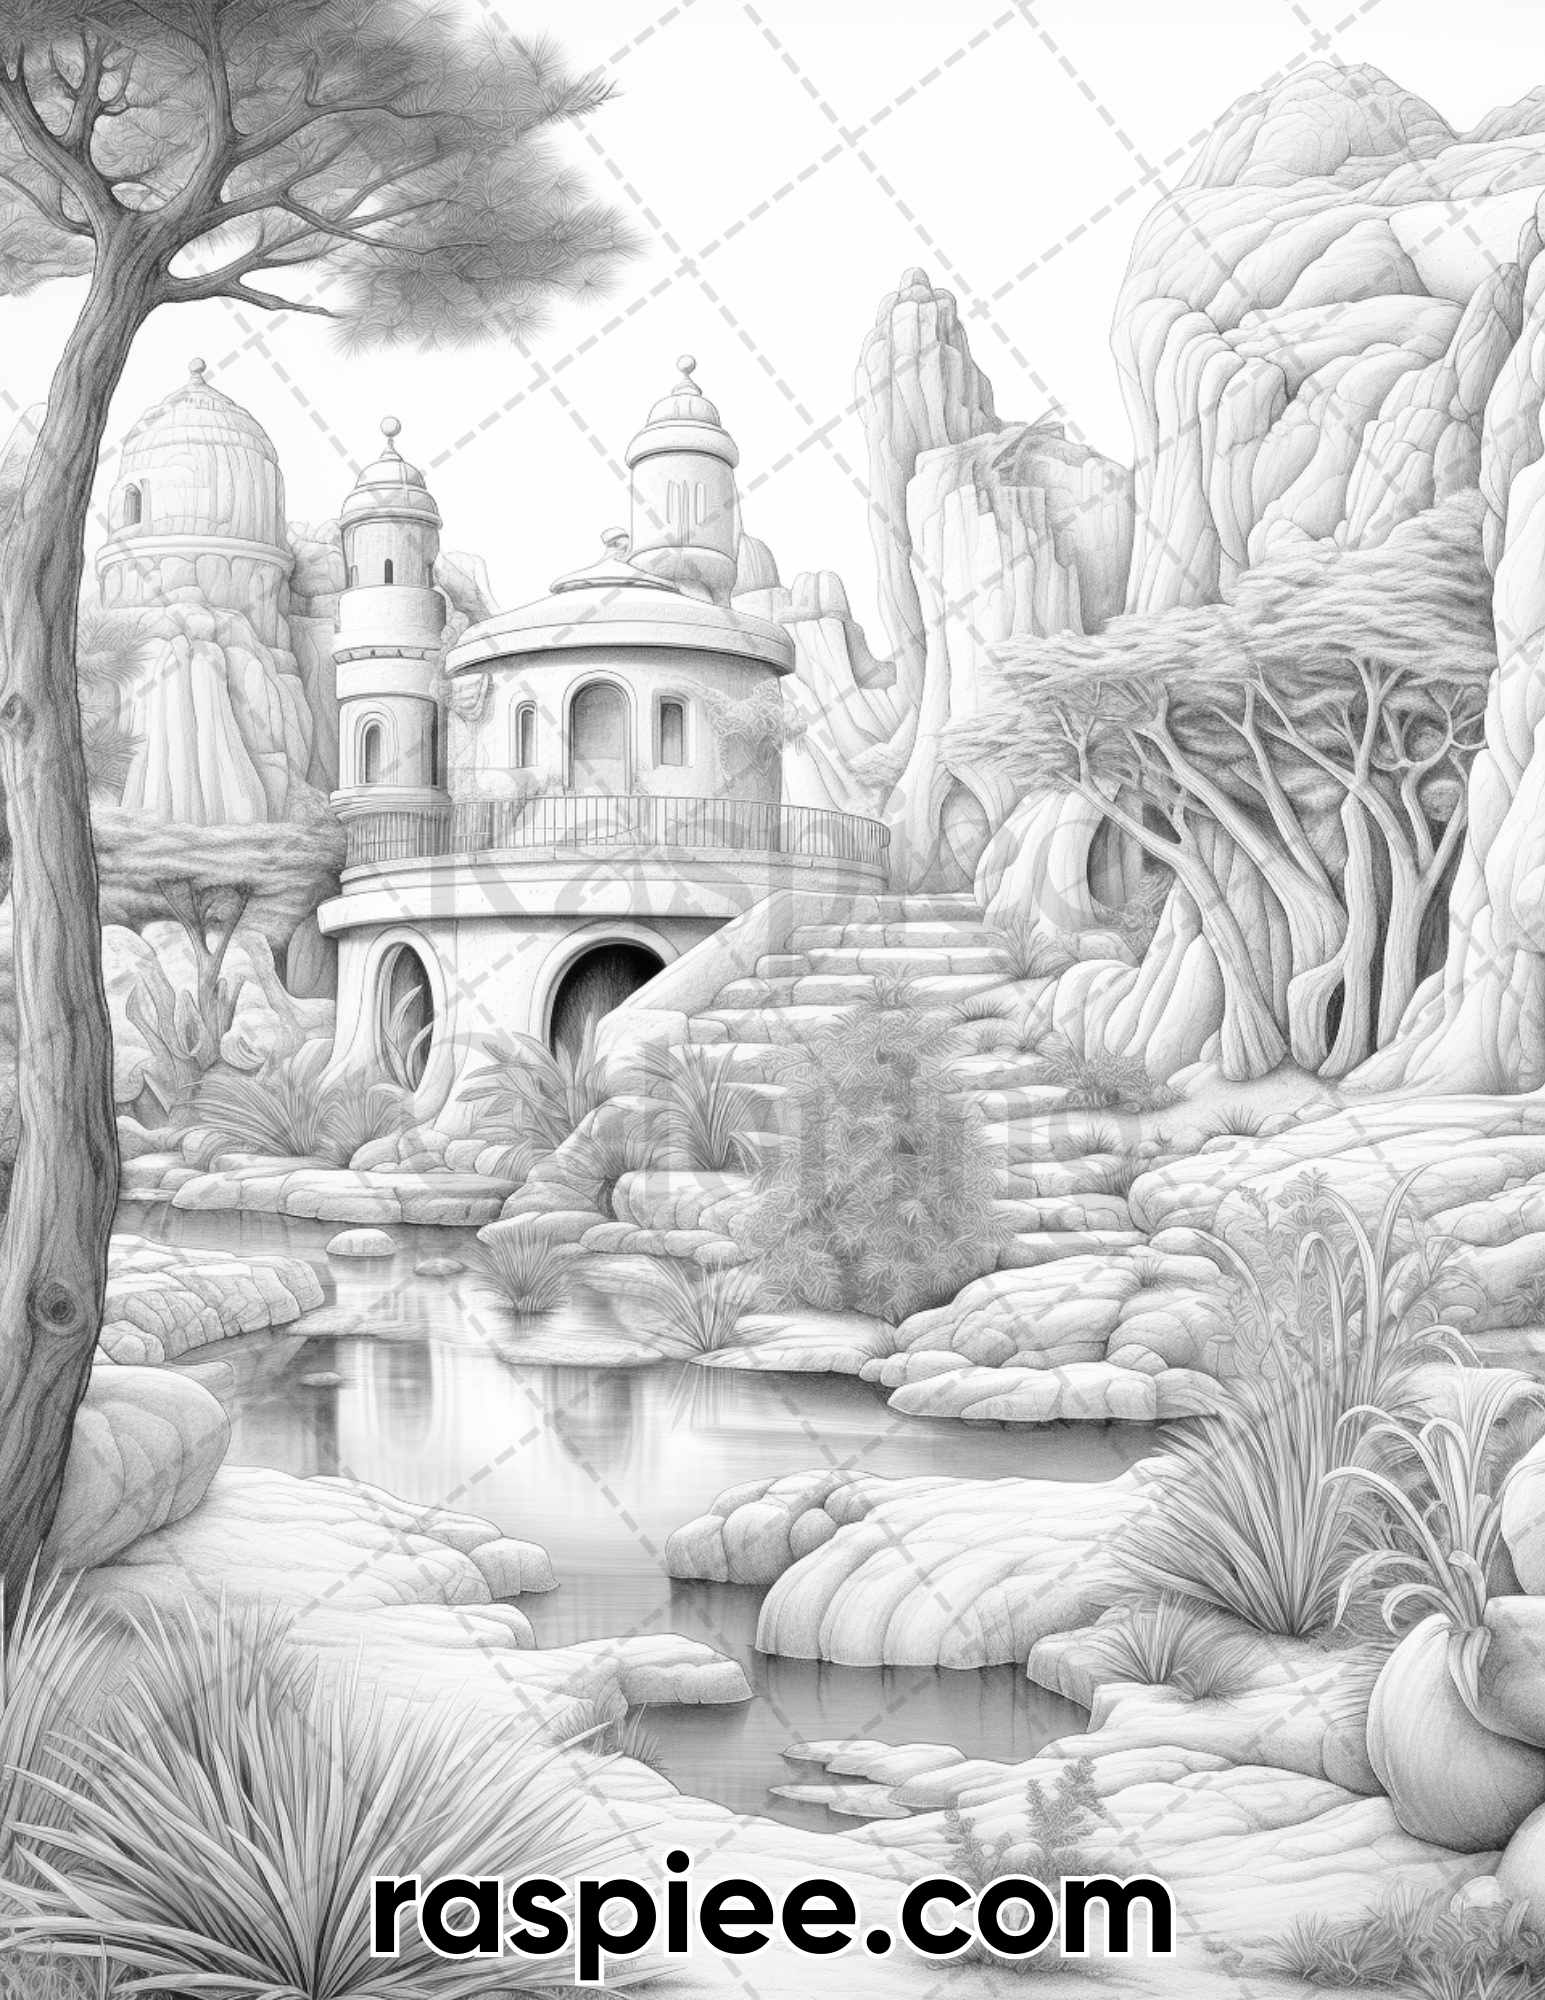 Desert Oasis Fairy Homes Coloring Pages, Grayscale Coloring Sheets, Adult Coloring Book Printable, Digital Downloadable Coloring, Detailed Fantasy Coloring, Stress Relief Coloring Pages, Desert Landscape Coloring Pages, Grown-Up Coloring Printable